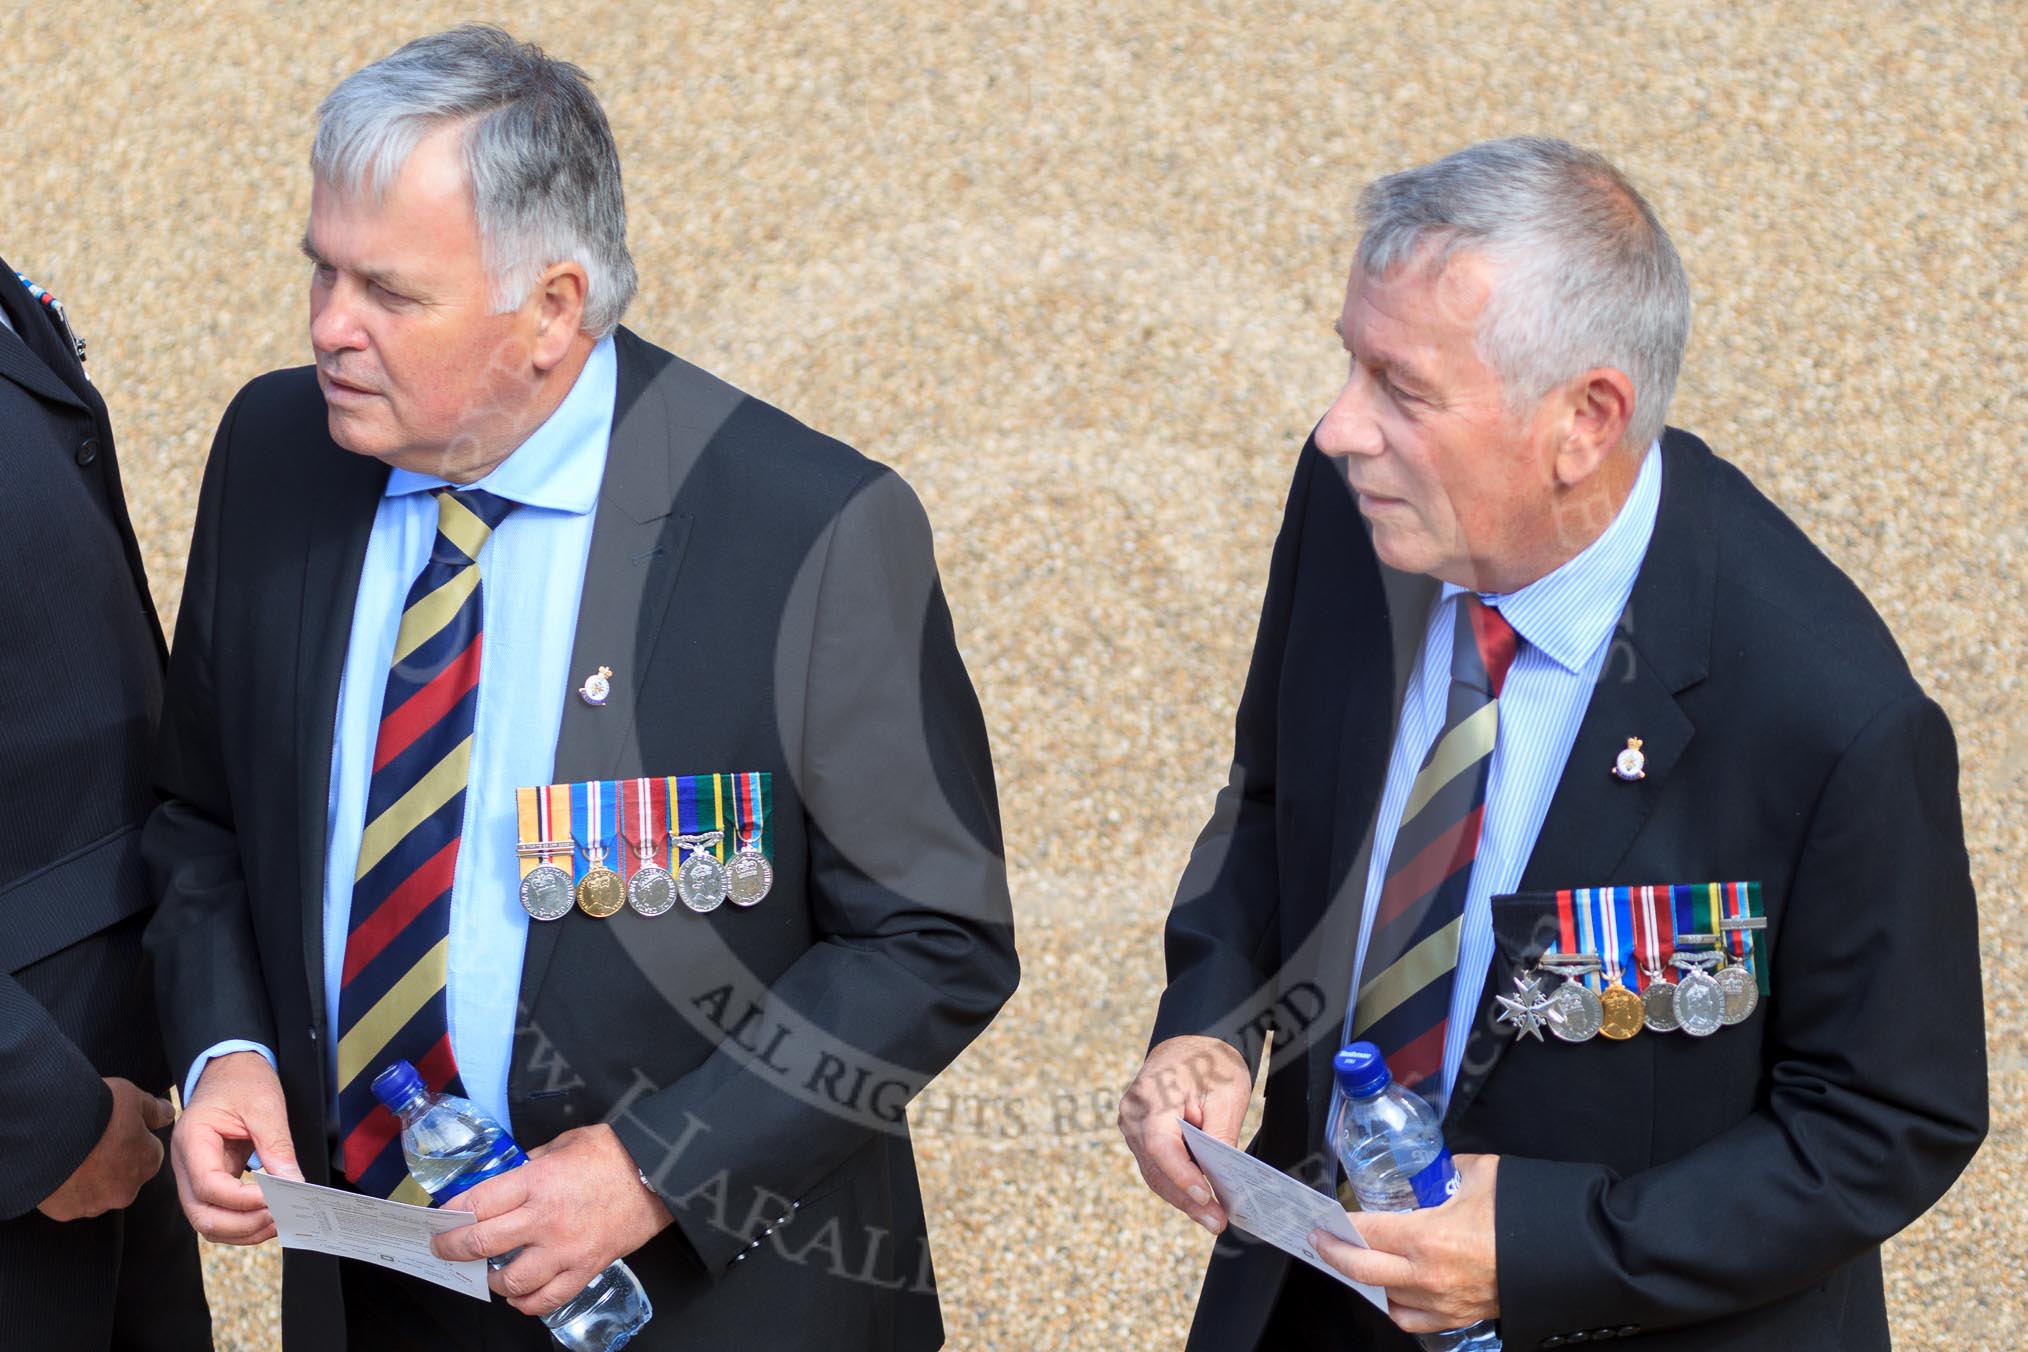 Two gentlemen in civilian clothes, wearing medals and Royal Army Medical Corps ties, before Trooping the Colour 2018, The Queen's Birthday Parade at Horse Guards Parade, Westminster, London, 9 June 2018, 10:07.